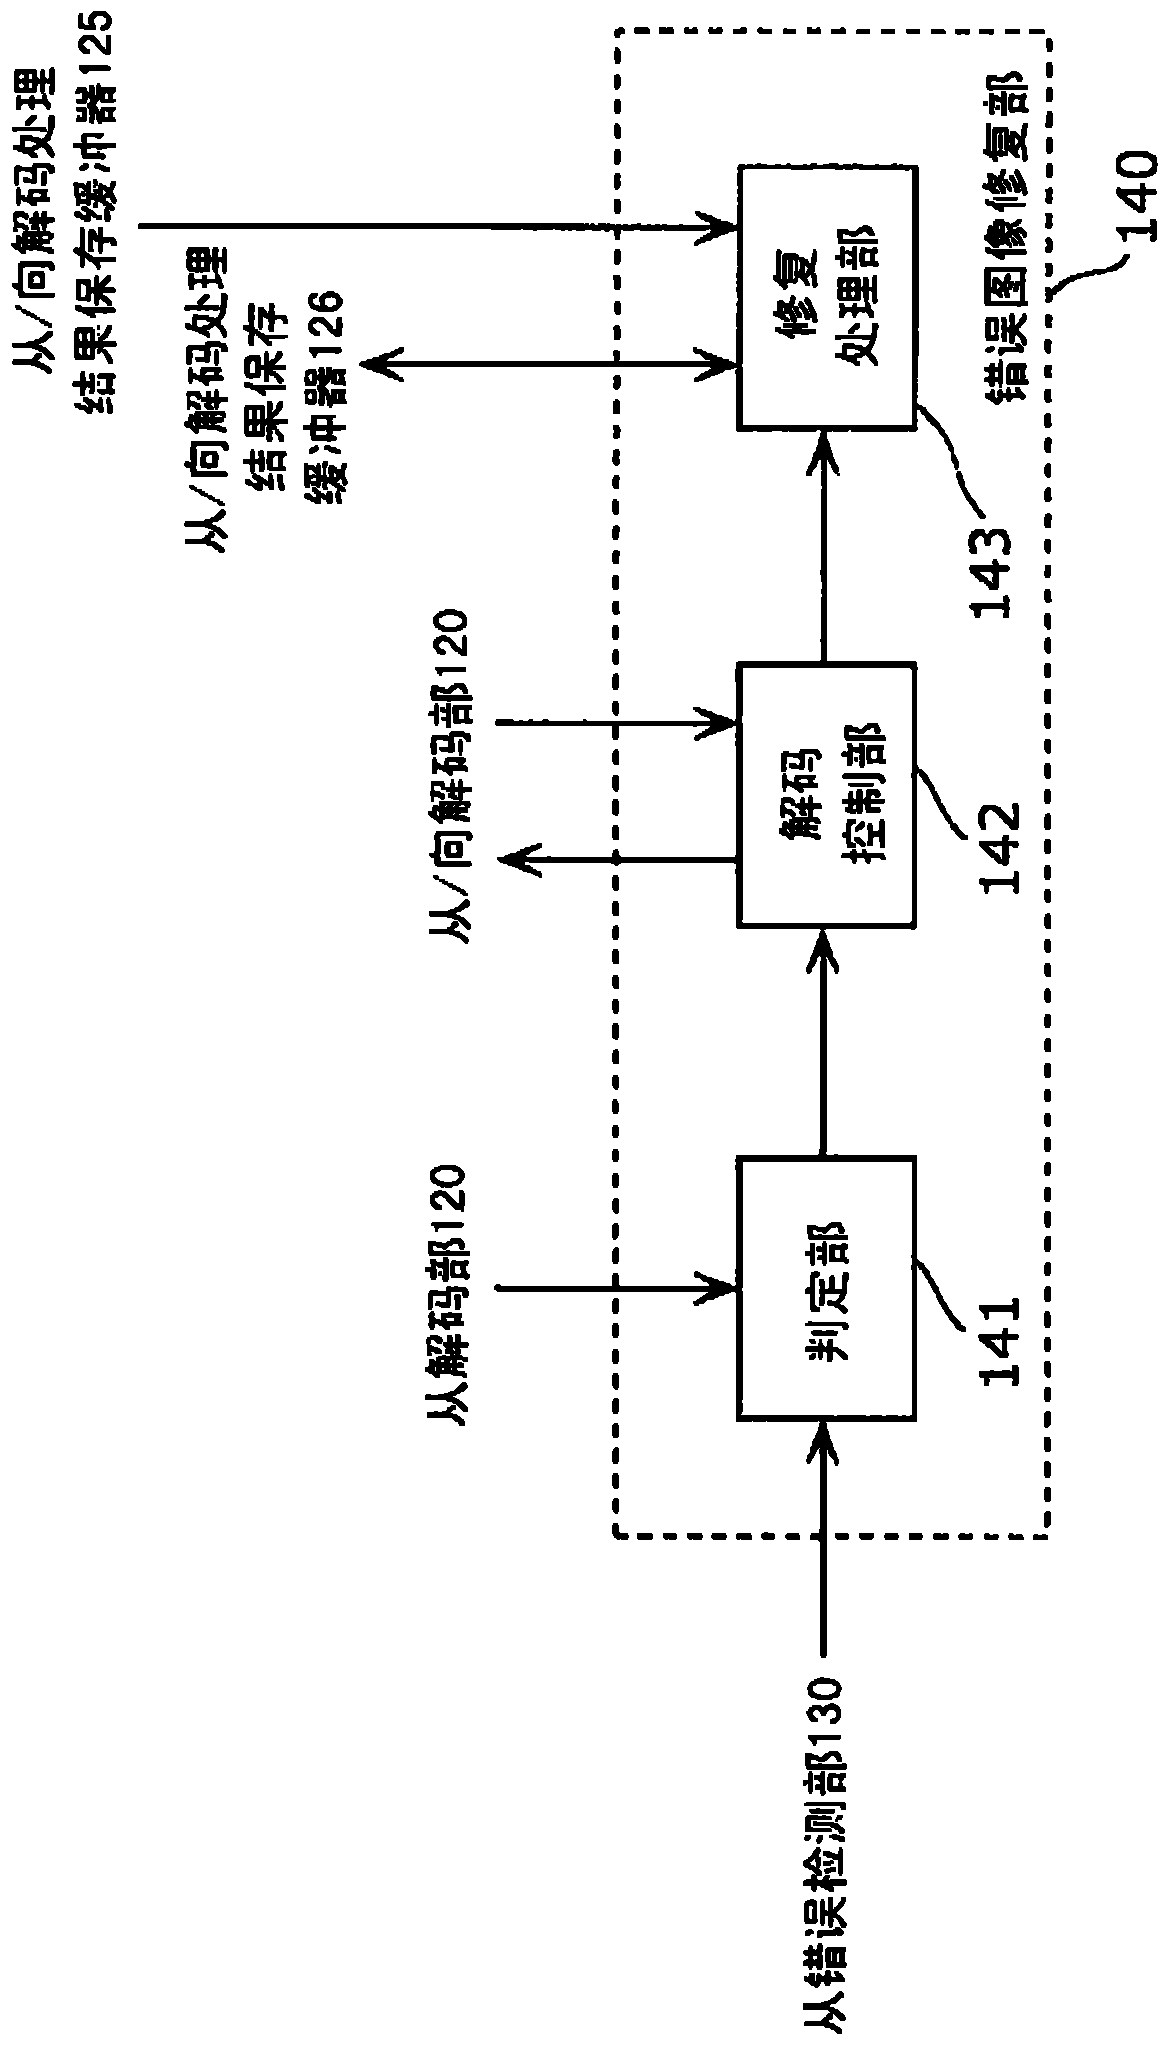 Multiview video decoding apparatus and multiview video decoding method